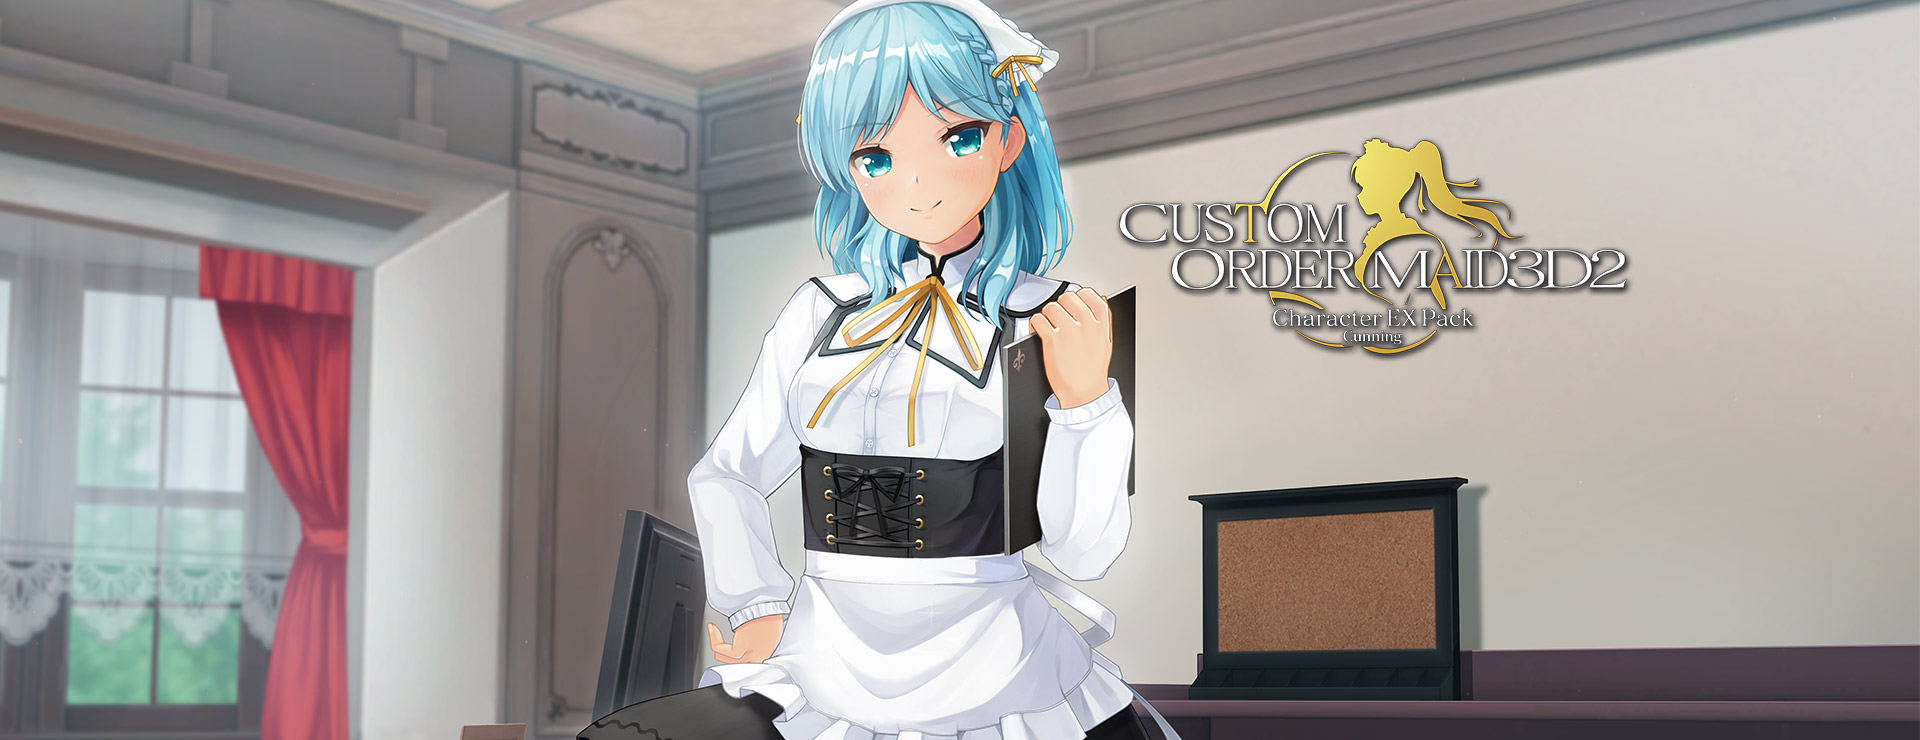 Custom Order Maid 3D: Character EX Pack Cunning - Simulación Juego